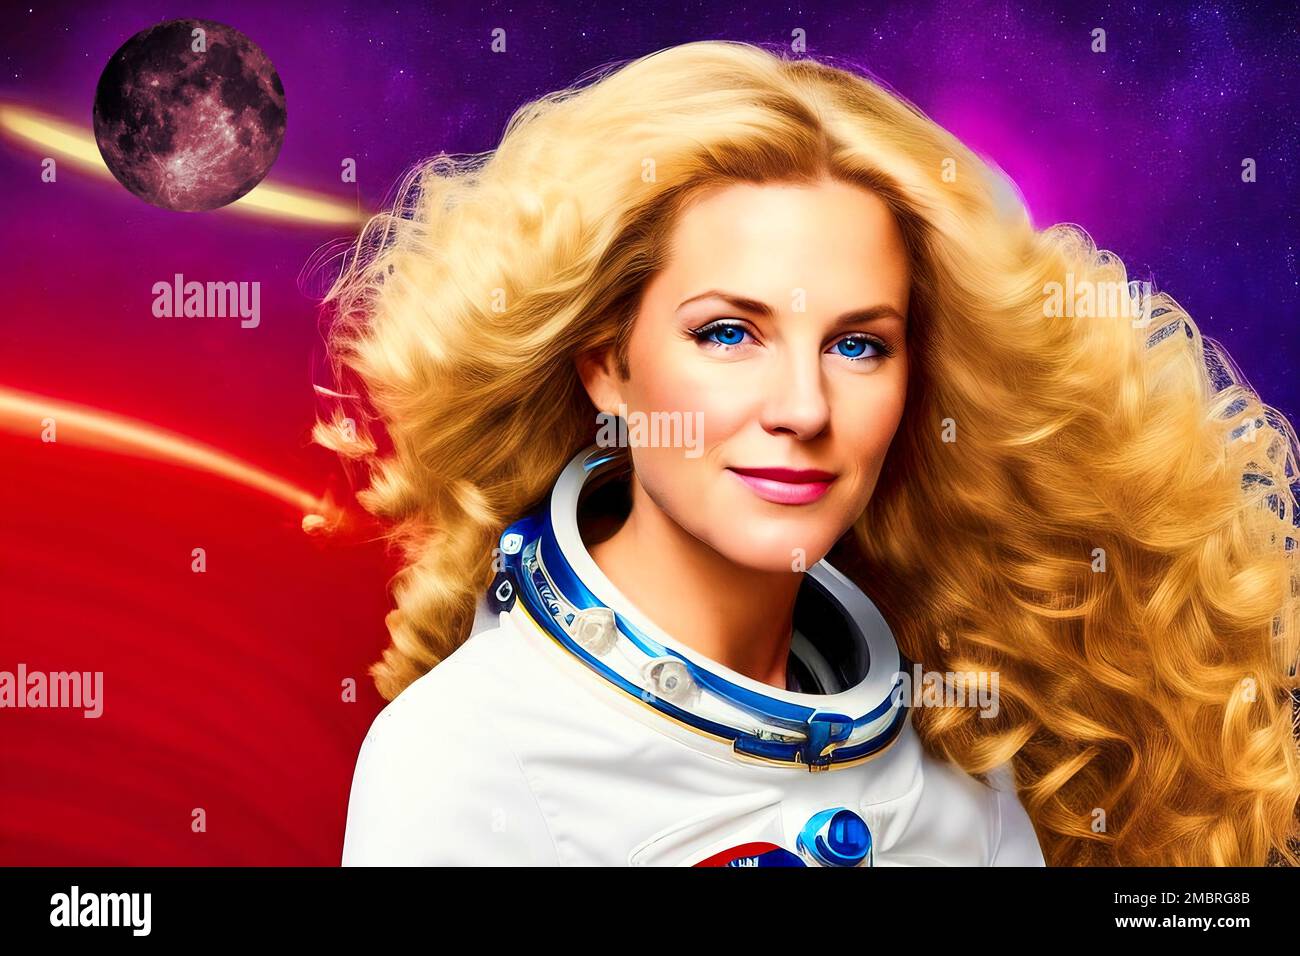 Illustration of a young blonde female astronaut with blue eyes wearing a spacesuit on a background with an abstract space representation, fictional pe Stock Photo